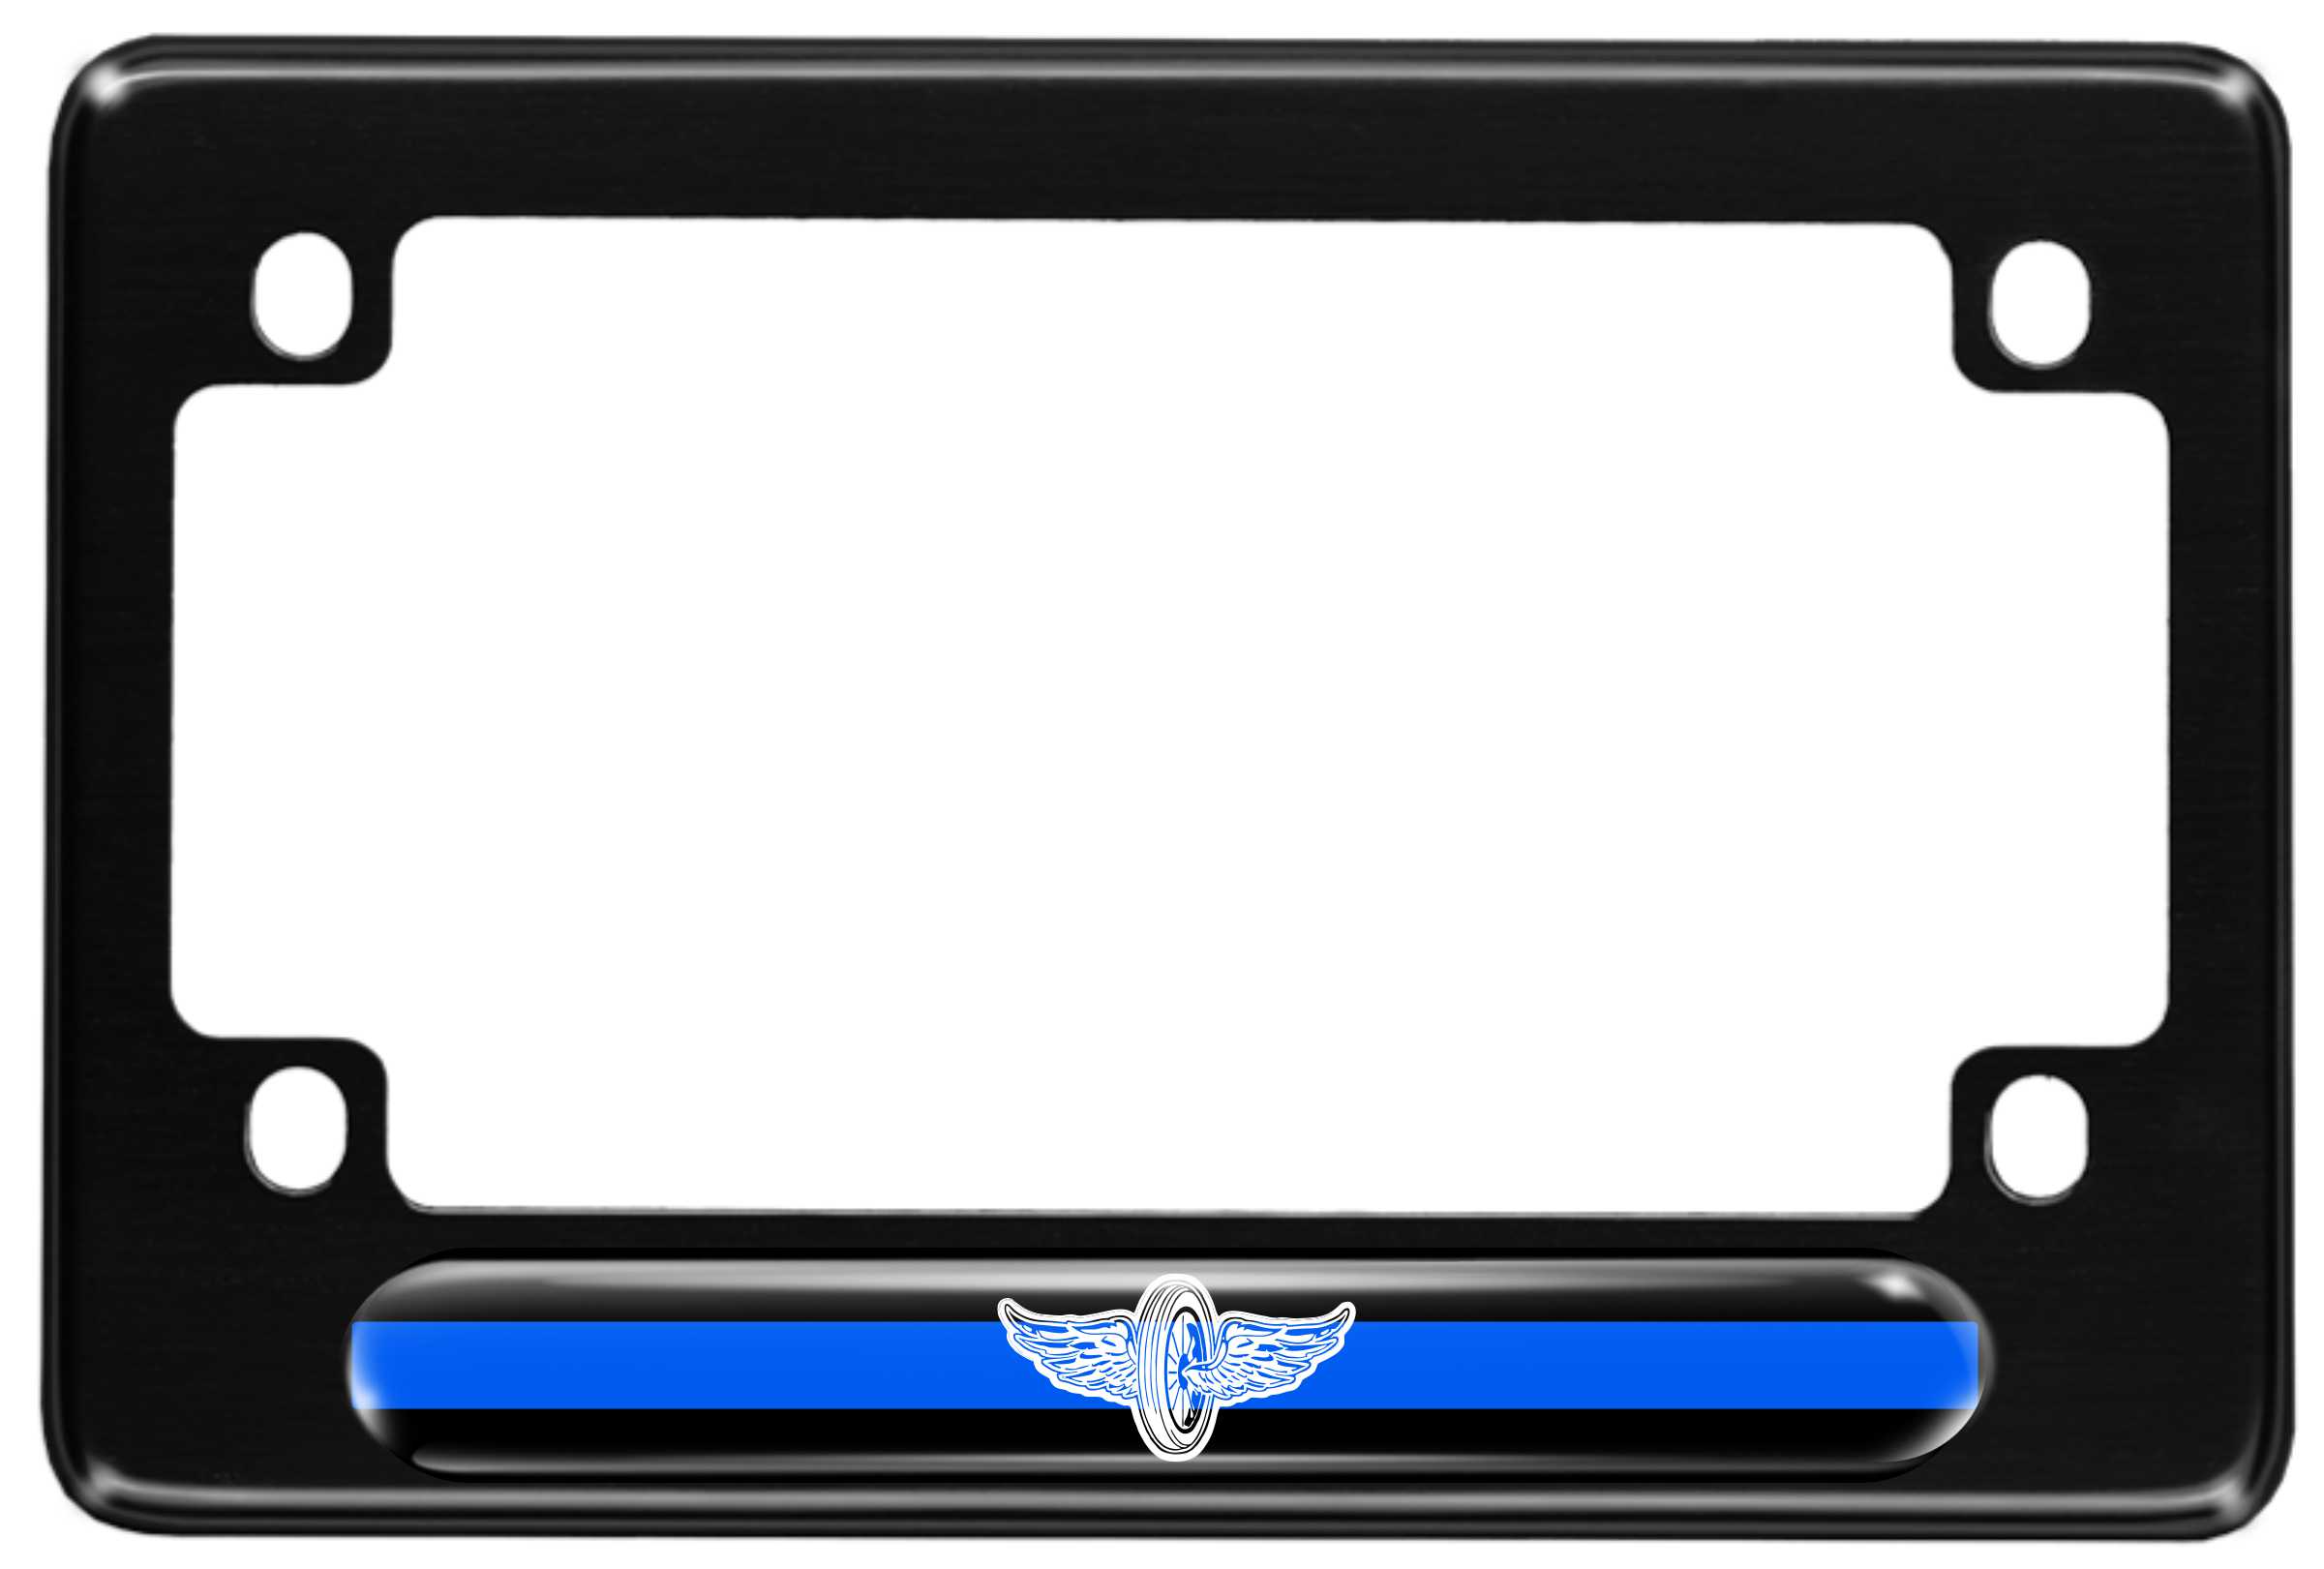 Thin Blue Line with Wings - custom Motorcycle aluminum license plate frame - Black